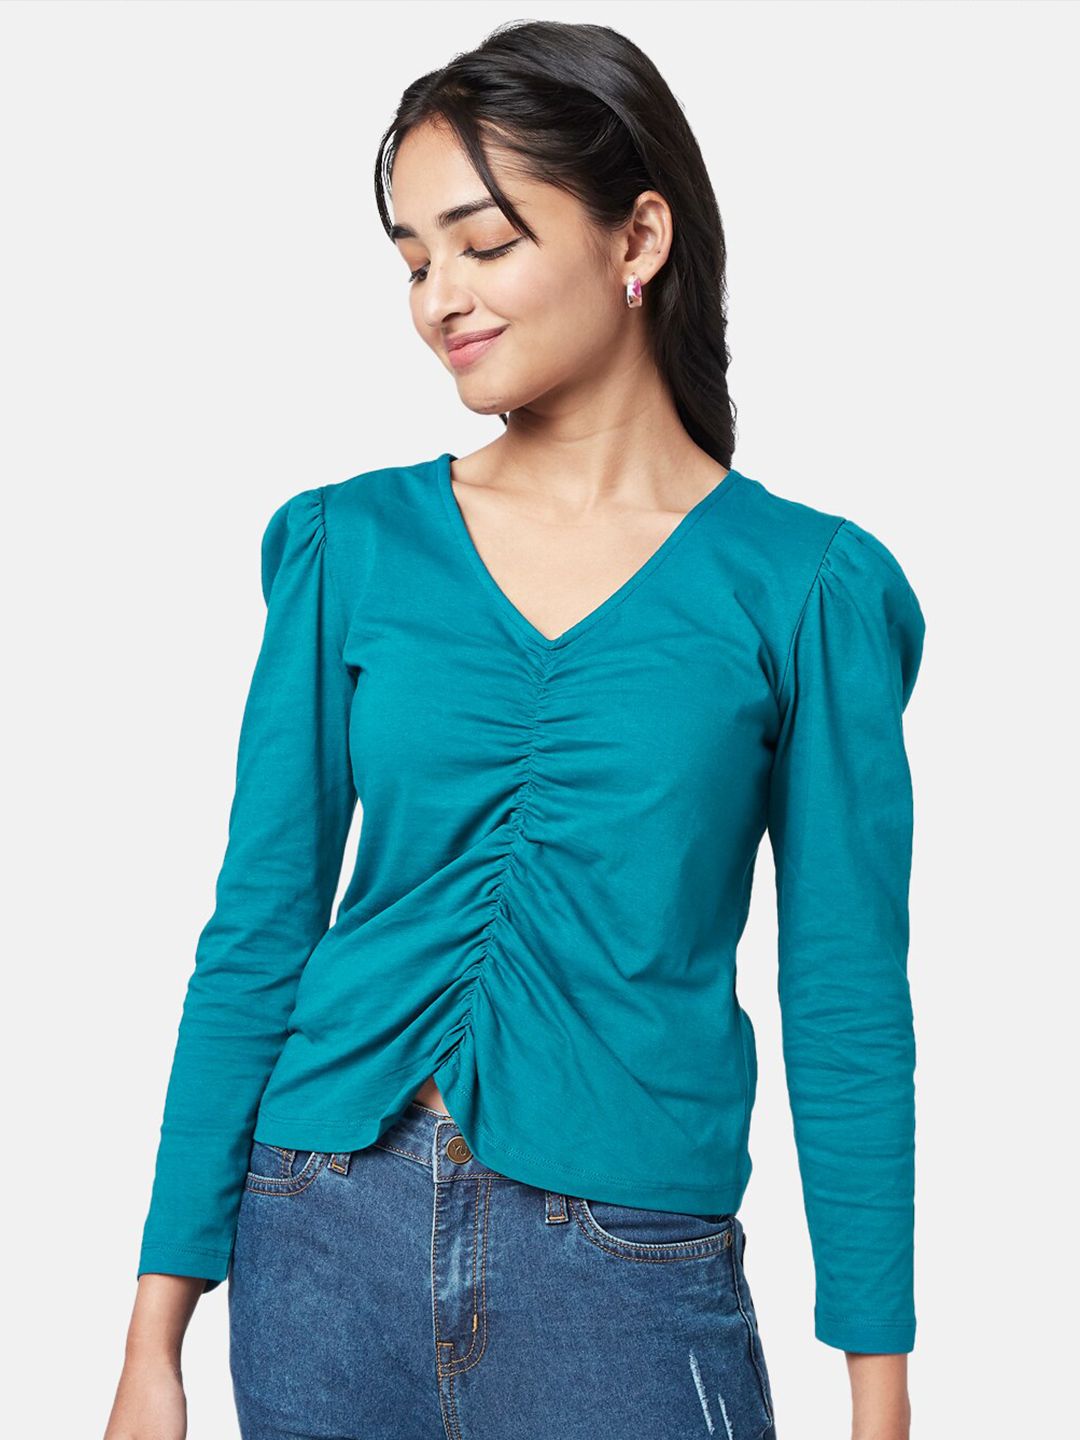 YU by Pantaloons Woman Solid V- Neck Top Price in India